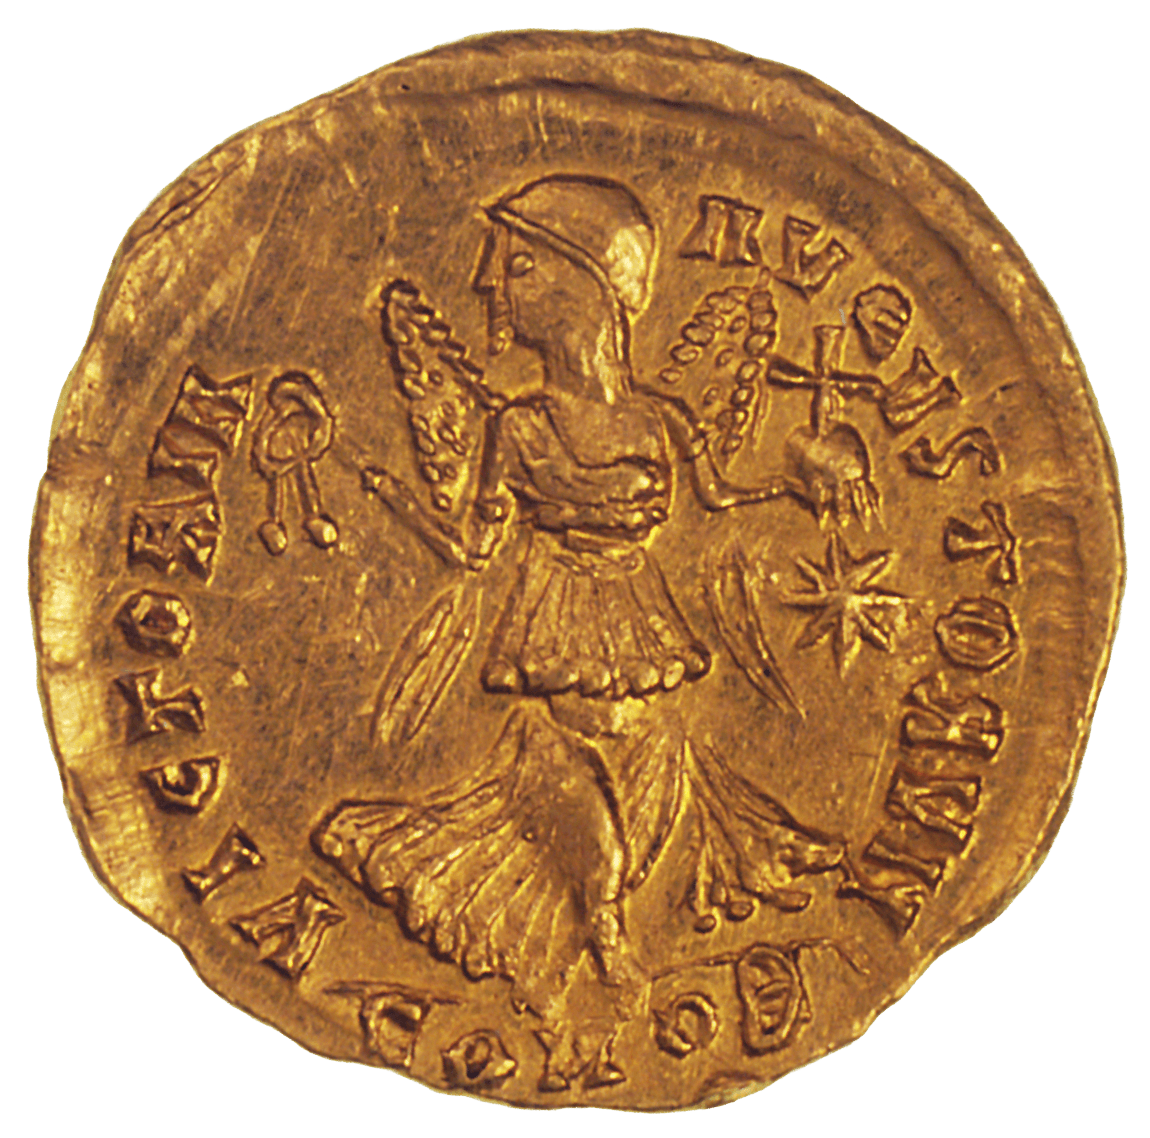 Bavaria or Baden-Württemberg or from the Region around Lake Balaton, Undefined Issue in the Name of Theodosius II, Tremissis (reverse)